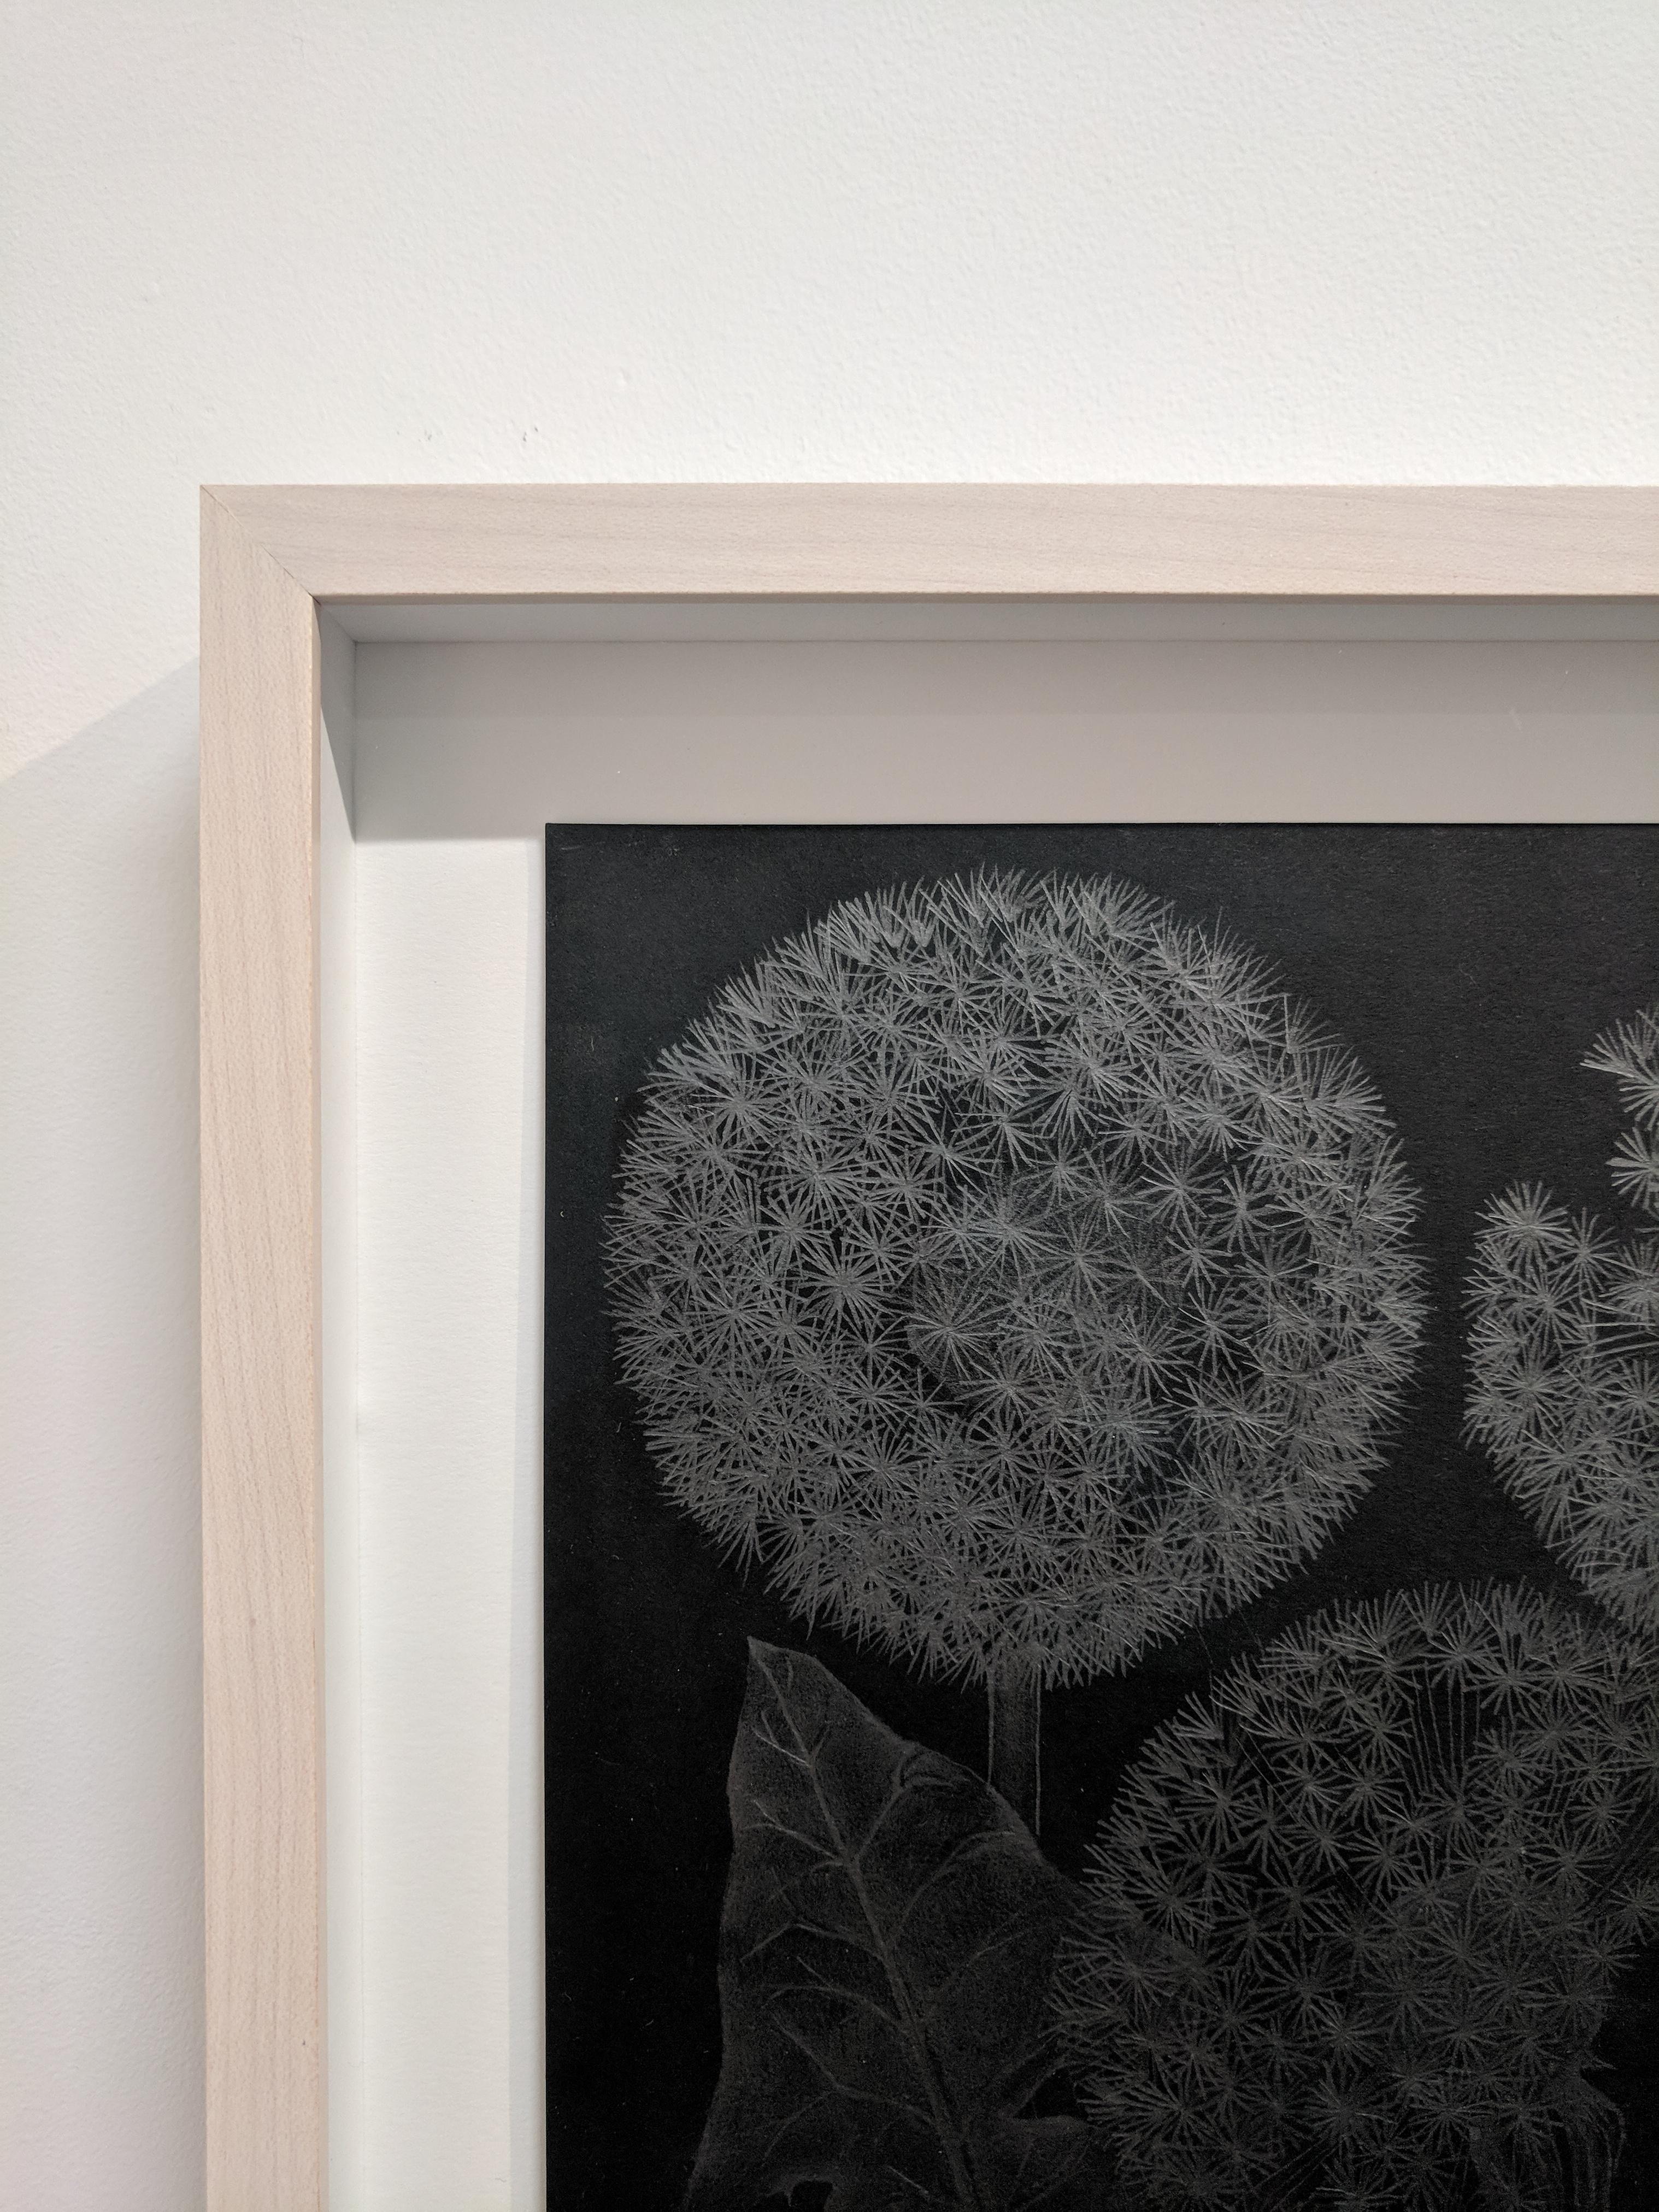 Three Dandelions with Bud, Small Framed Silver Botanical Drawing on Black Paper - Art by Margot Glass